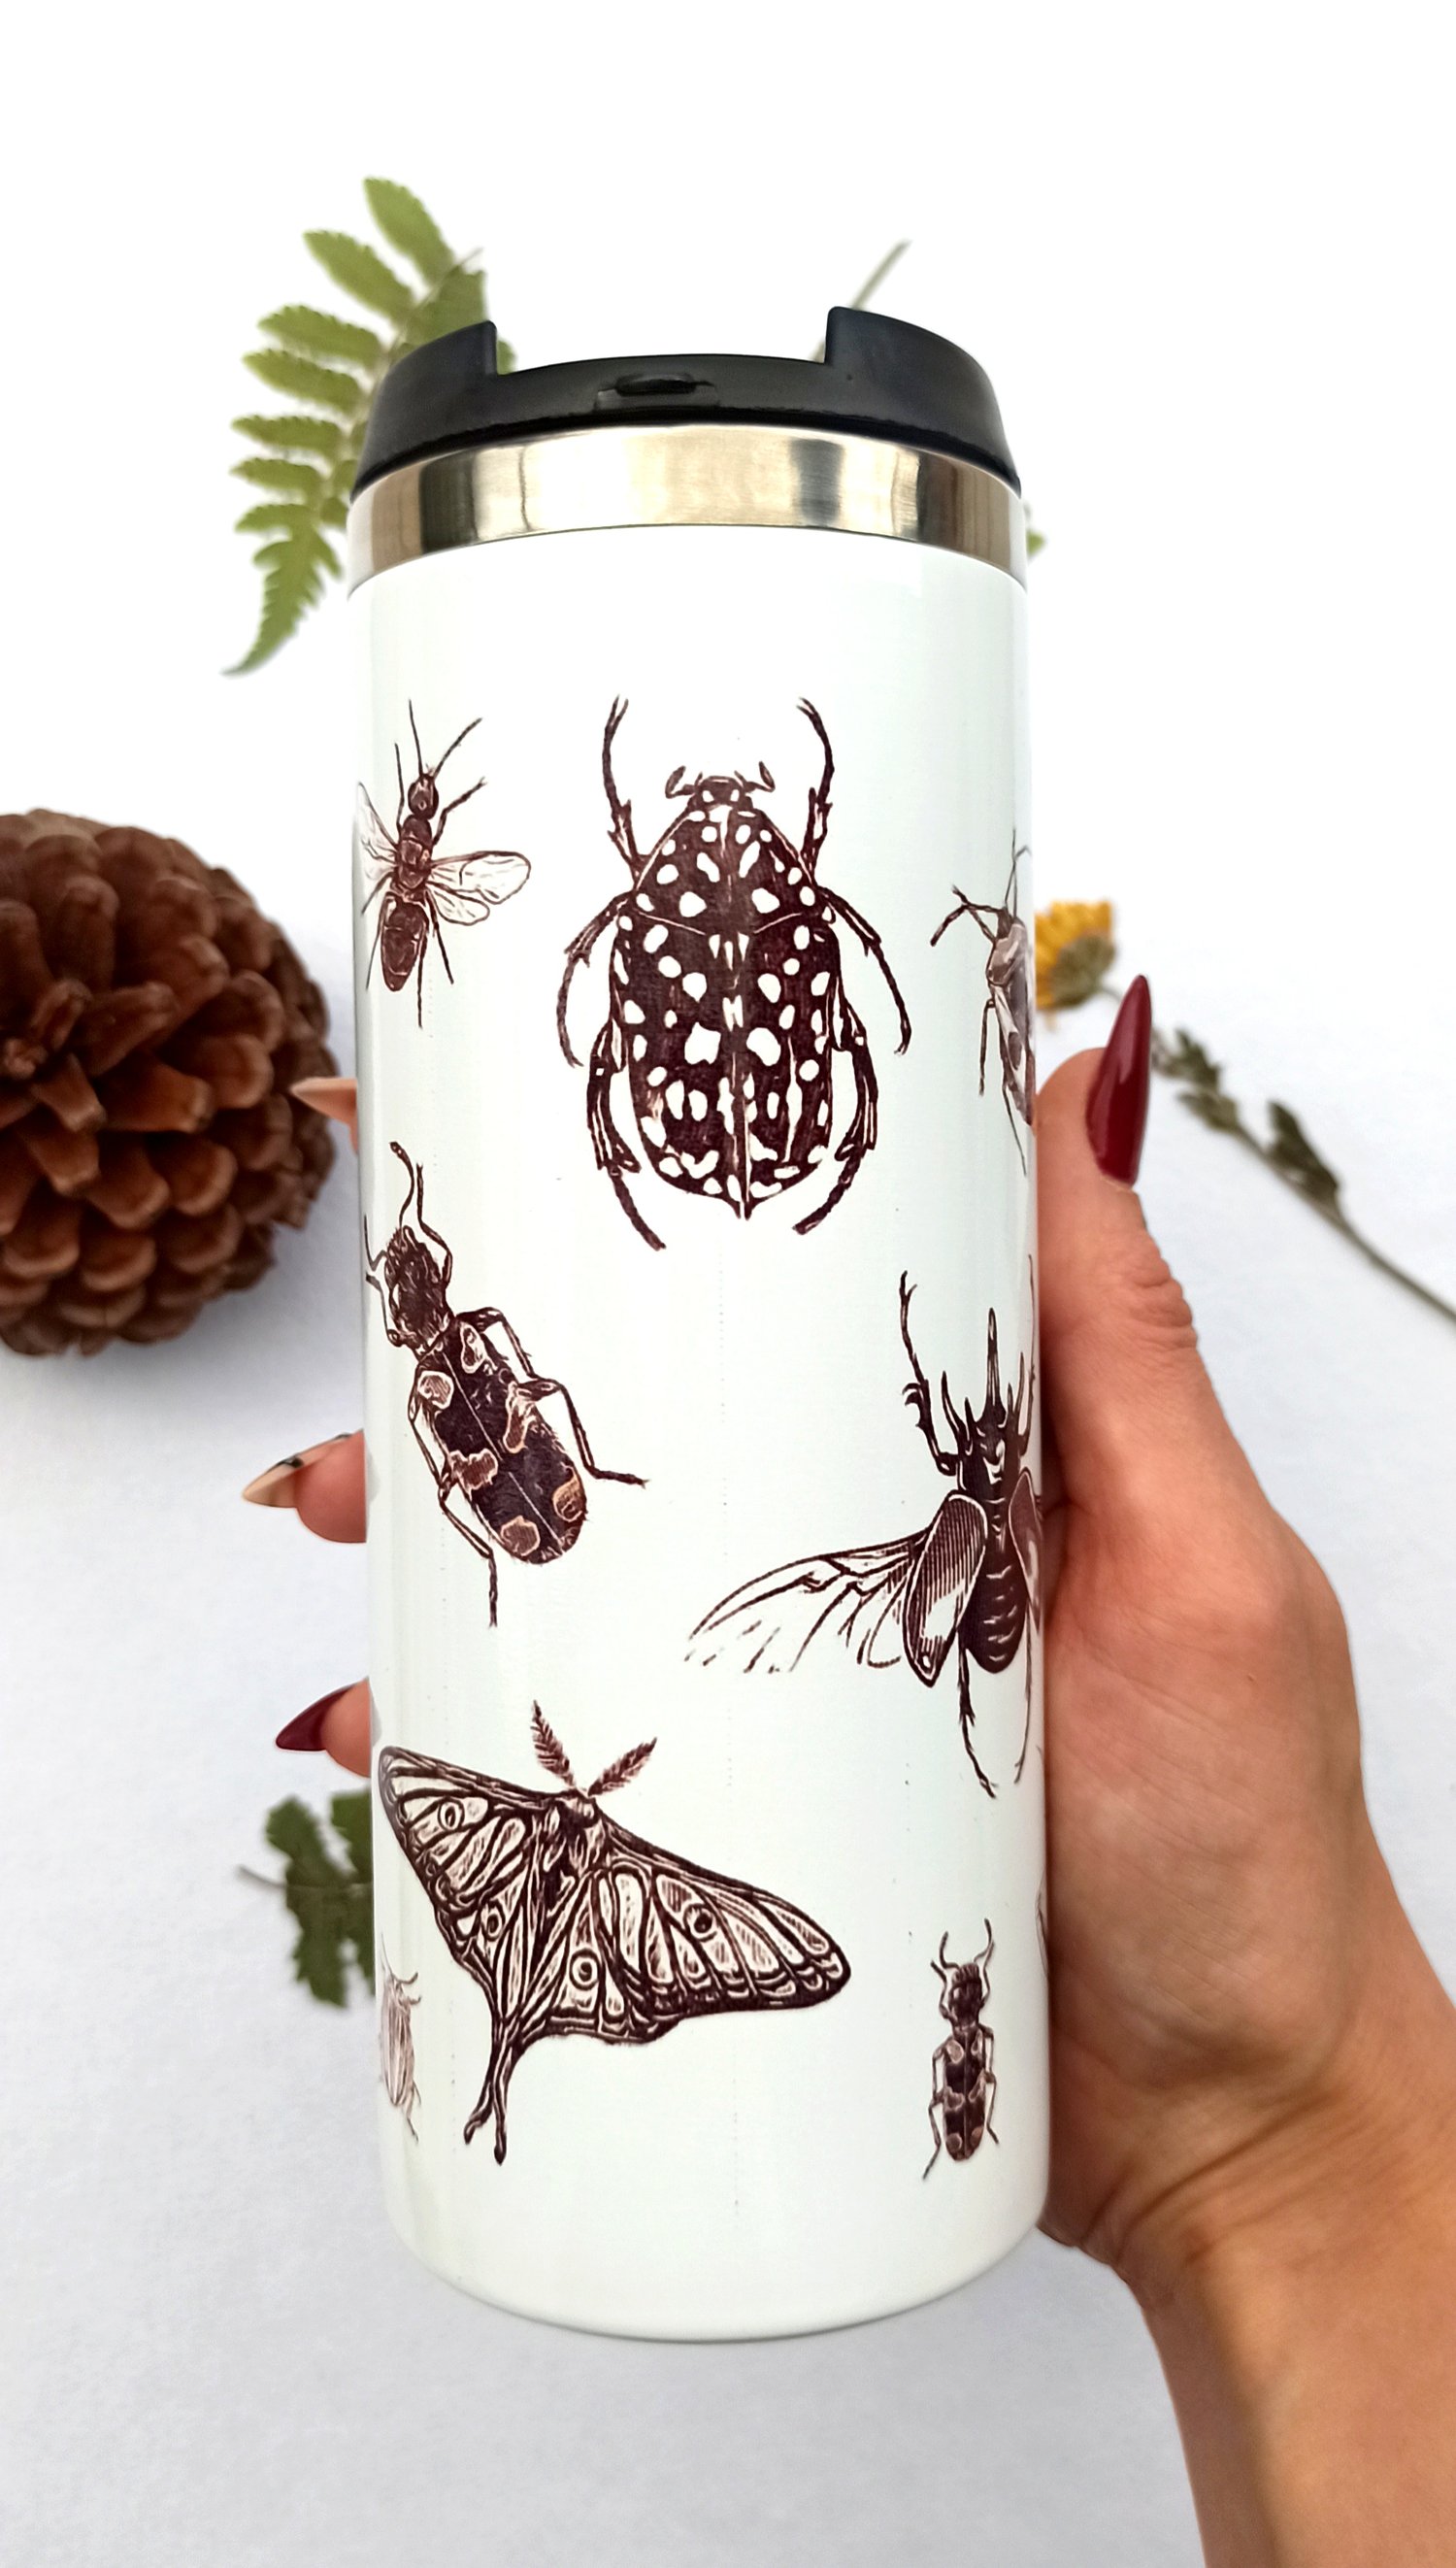 Image of Travel Mug Stainless steel Thermos with Insect Illustrations